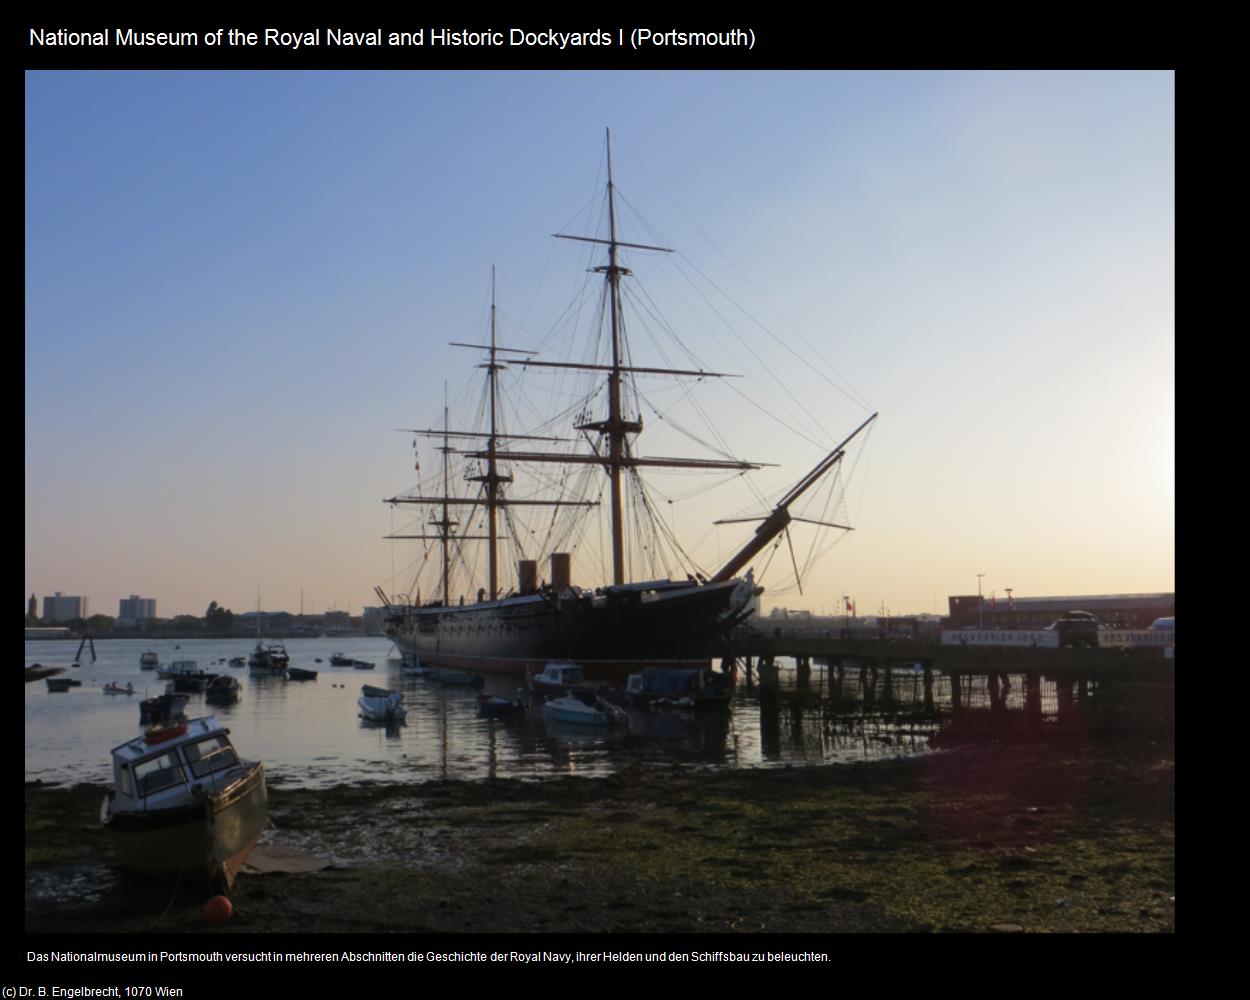 National Museum of the Royal Naval and Historic Dockyards I (Portsmouth, England) in Kulturatlas-ENGLAND und WALES